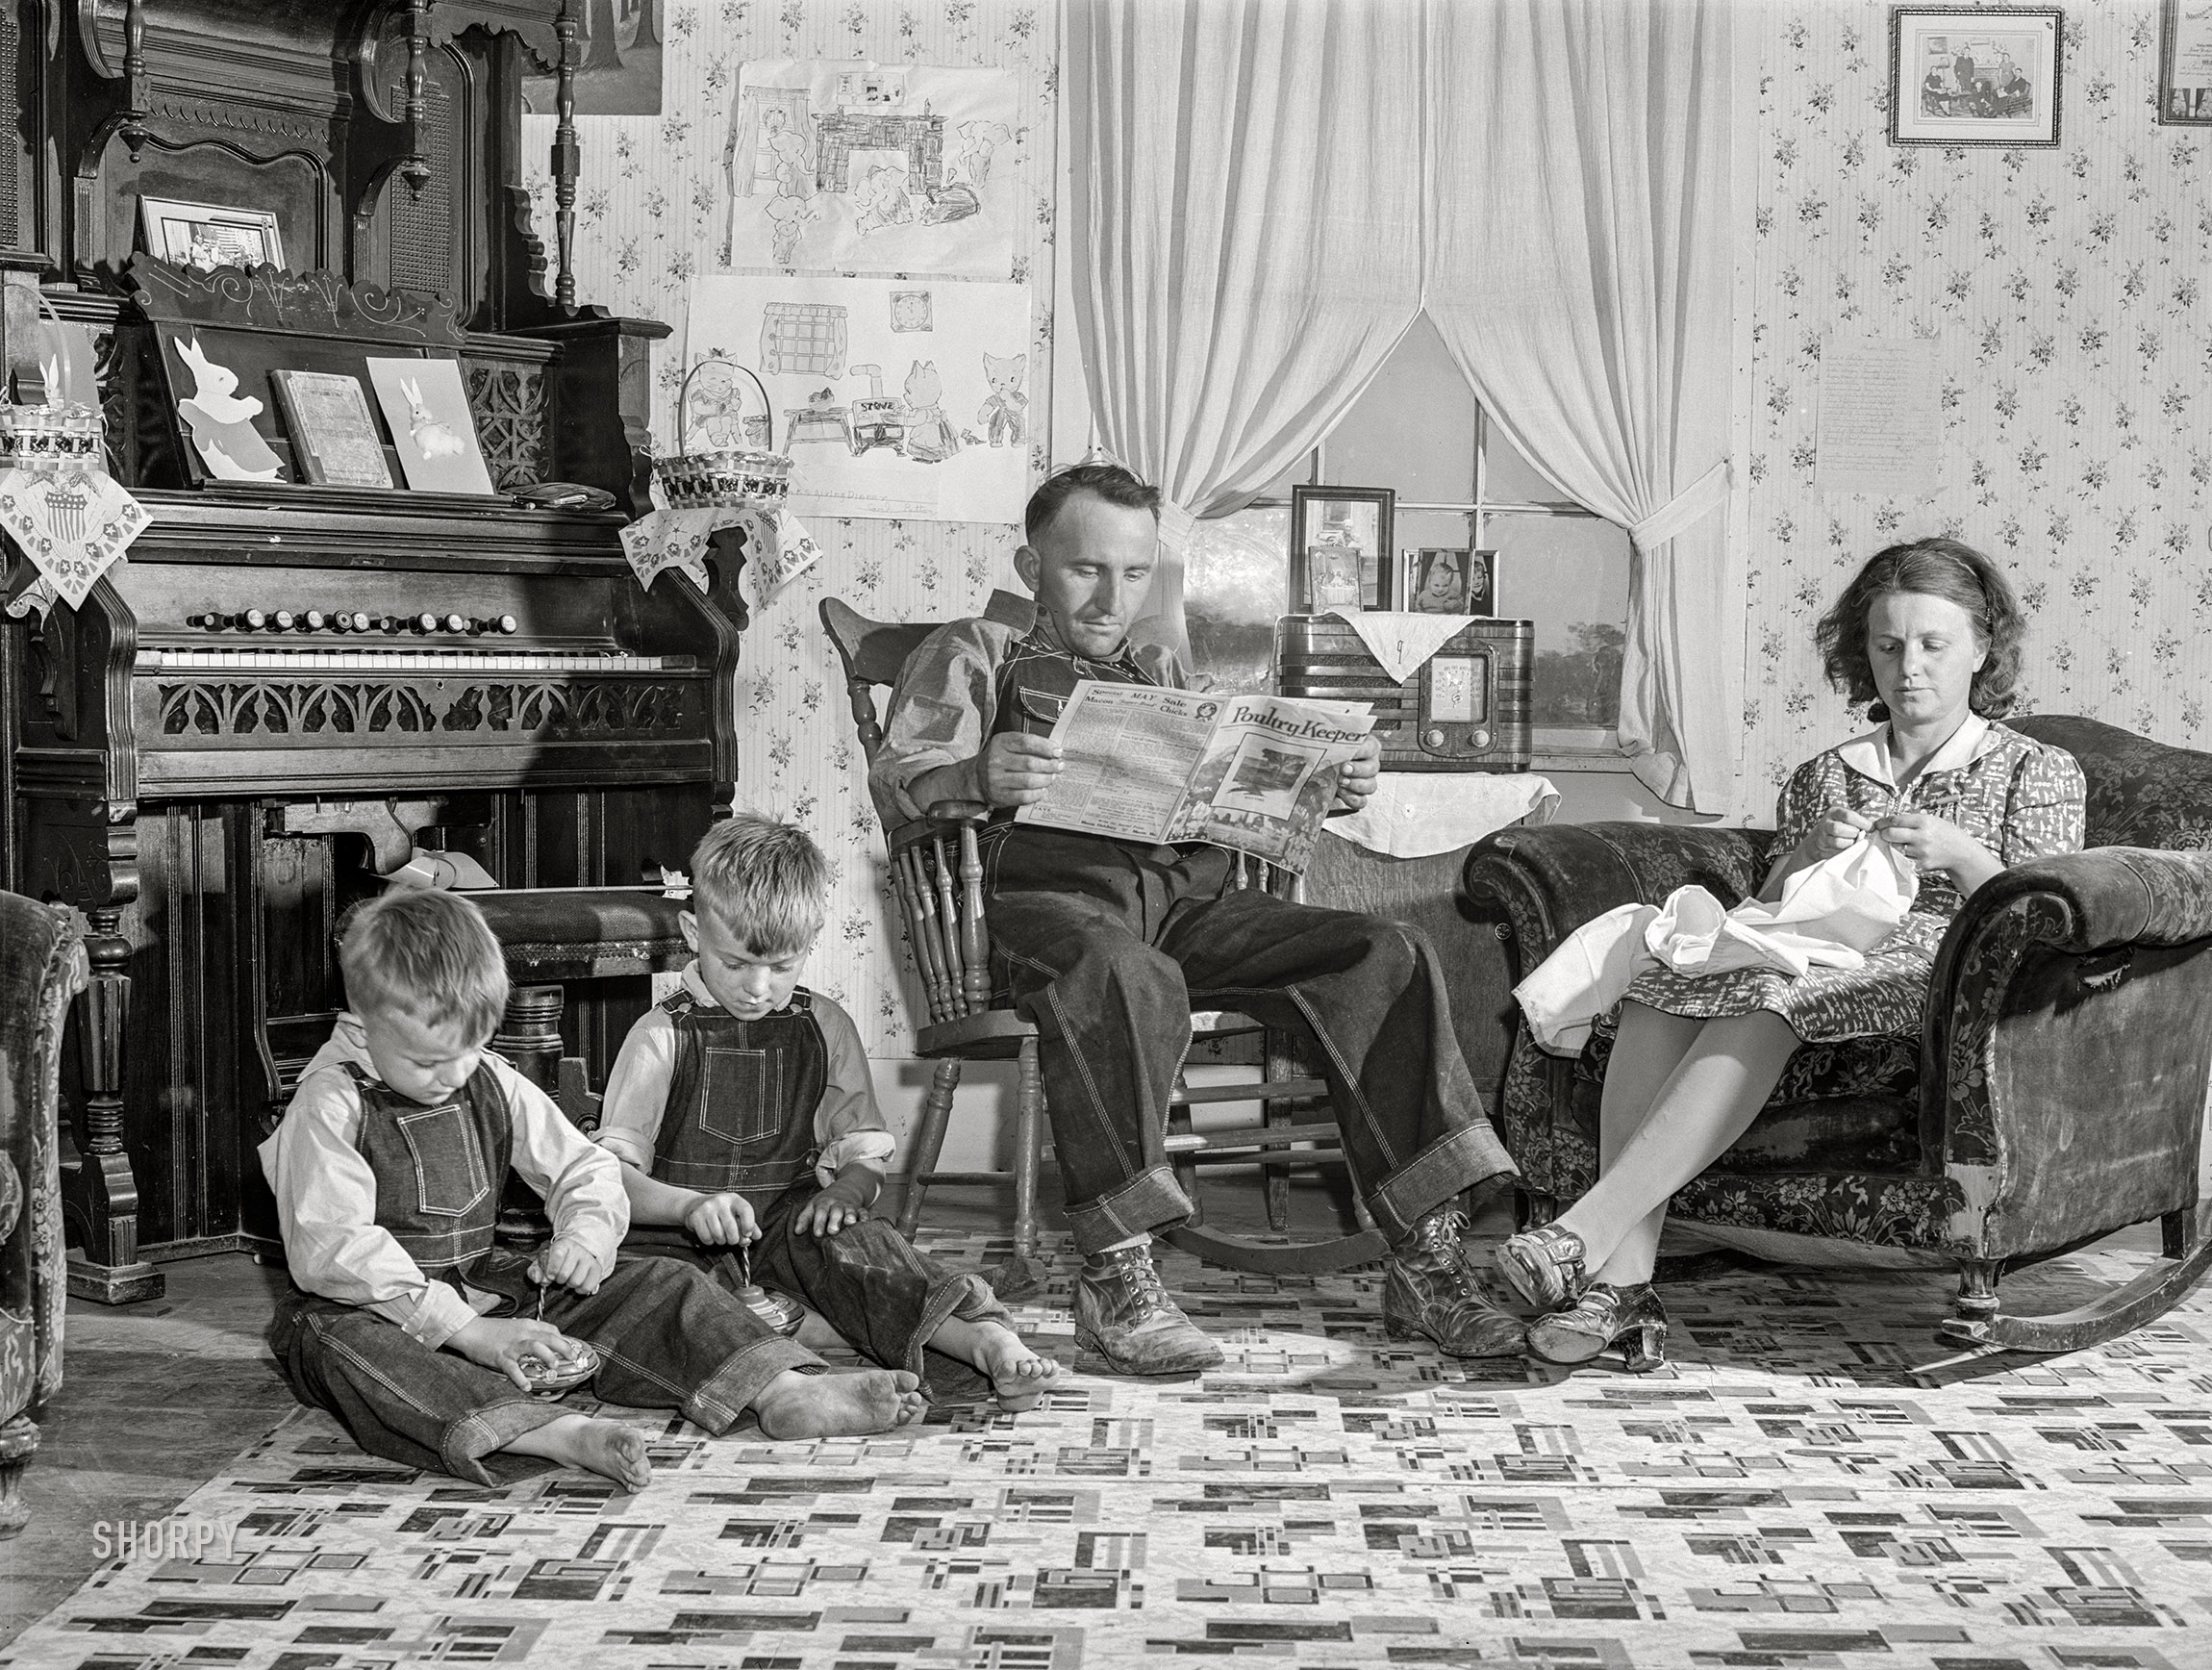 May 1940. "Farm Security Administration tenant purchase borrower and family. Crawford County, Illinois." Medium format acetate negative by John Vachon for the FSA. View full size.
